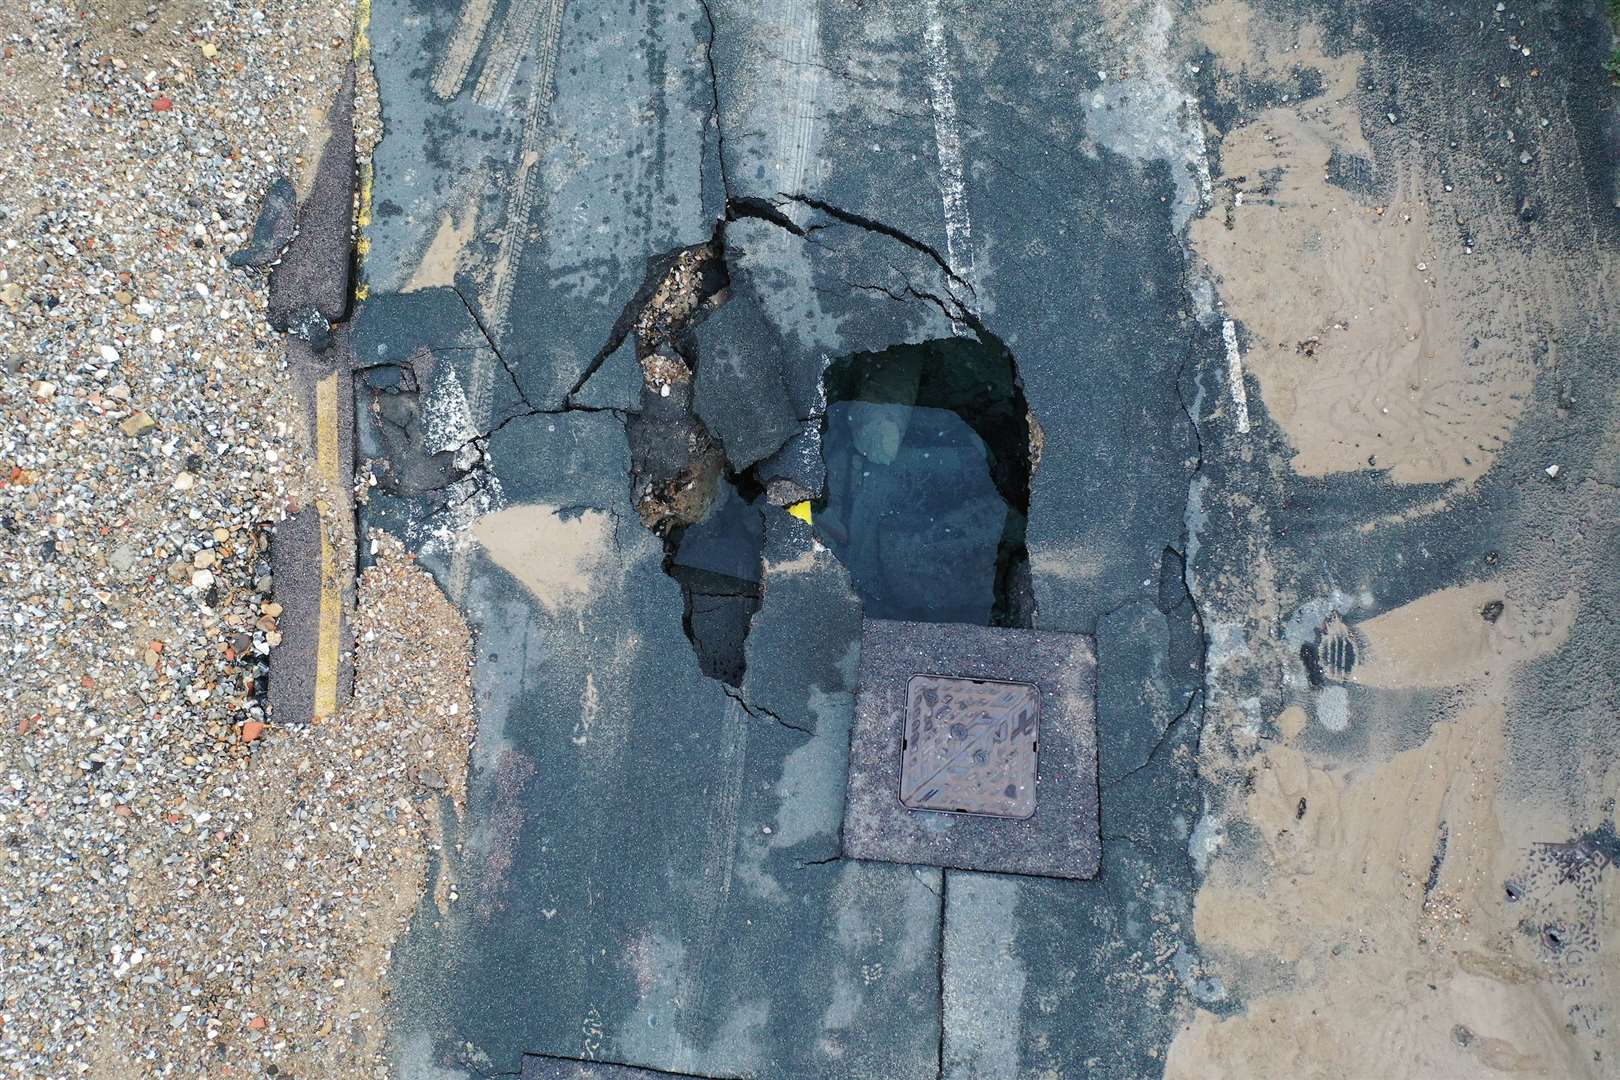 The sinkhole open in Priory Road due to a burst water main. Images: UKNIP